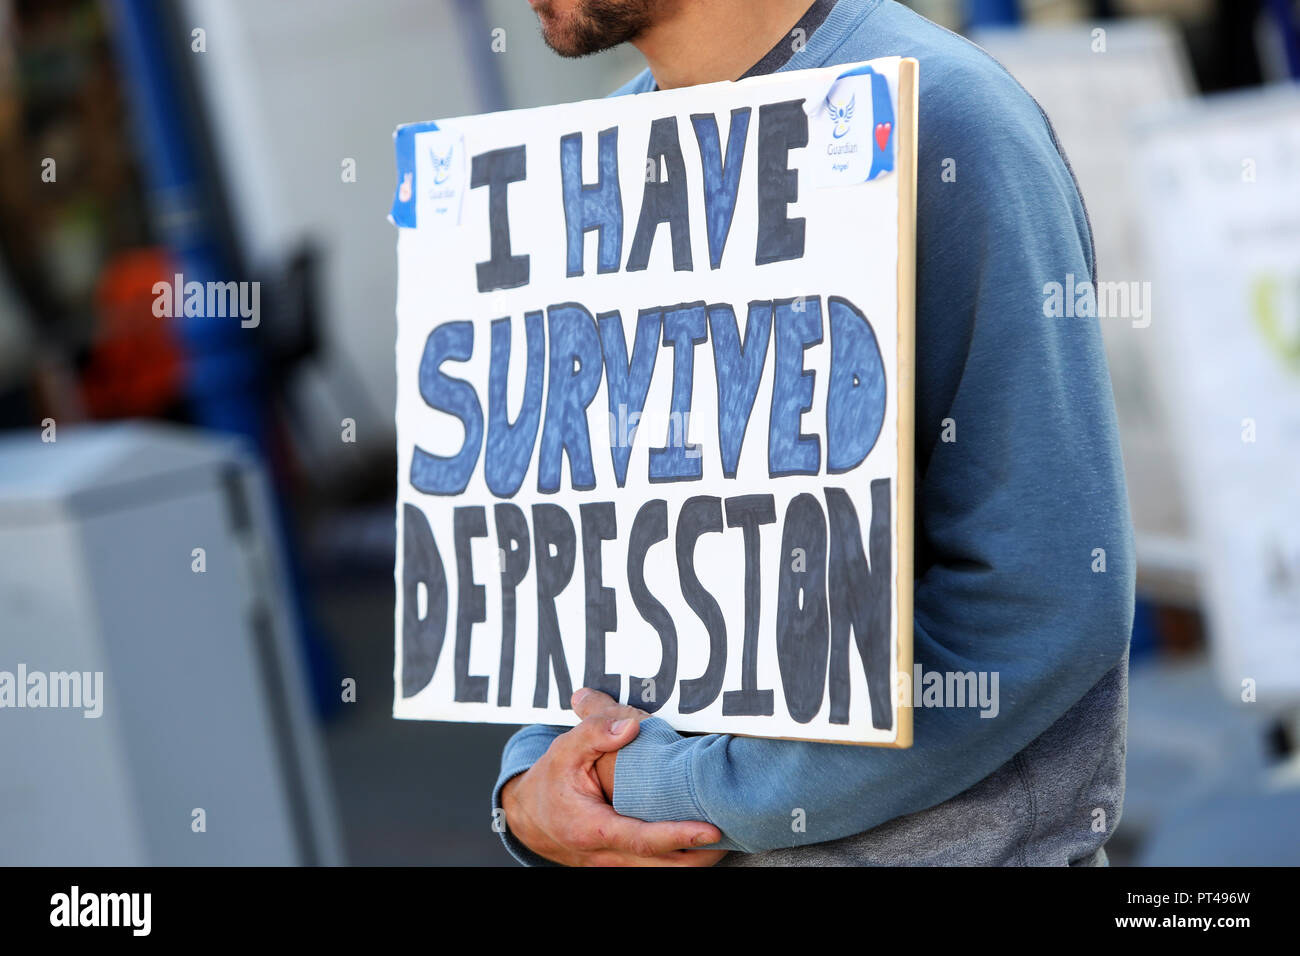 A group staging an awareness campaign in Bognor Regis highlighting depression and mental Health awareness. UK. Stock Photo